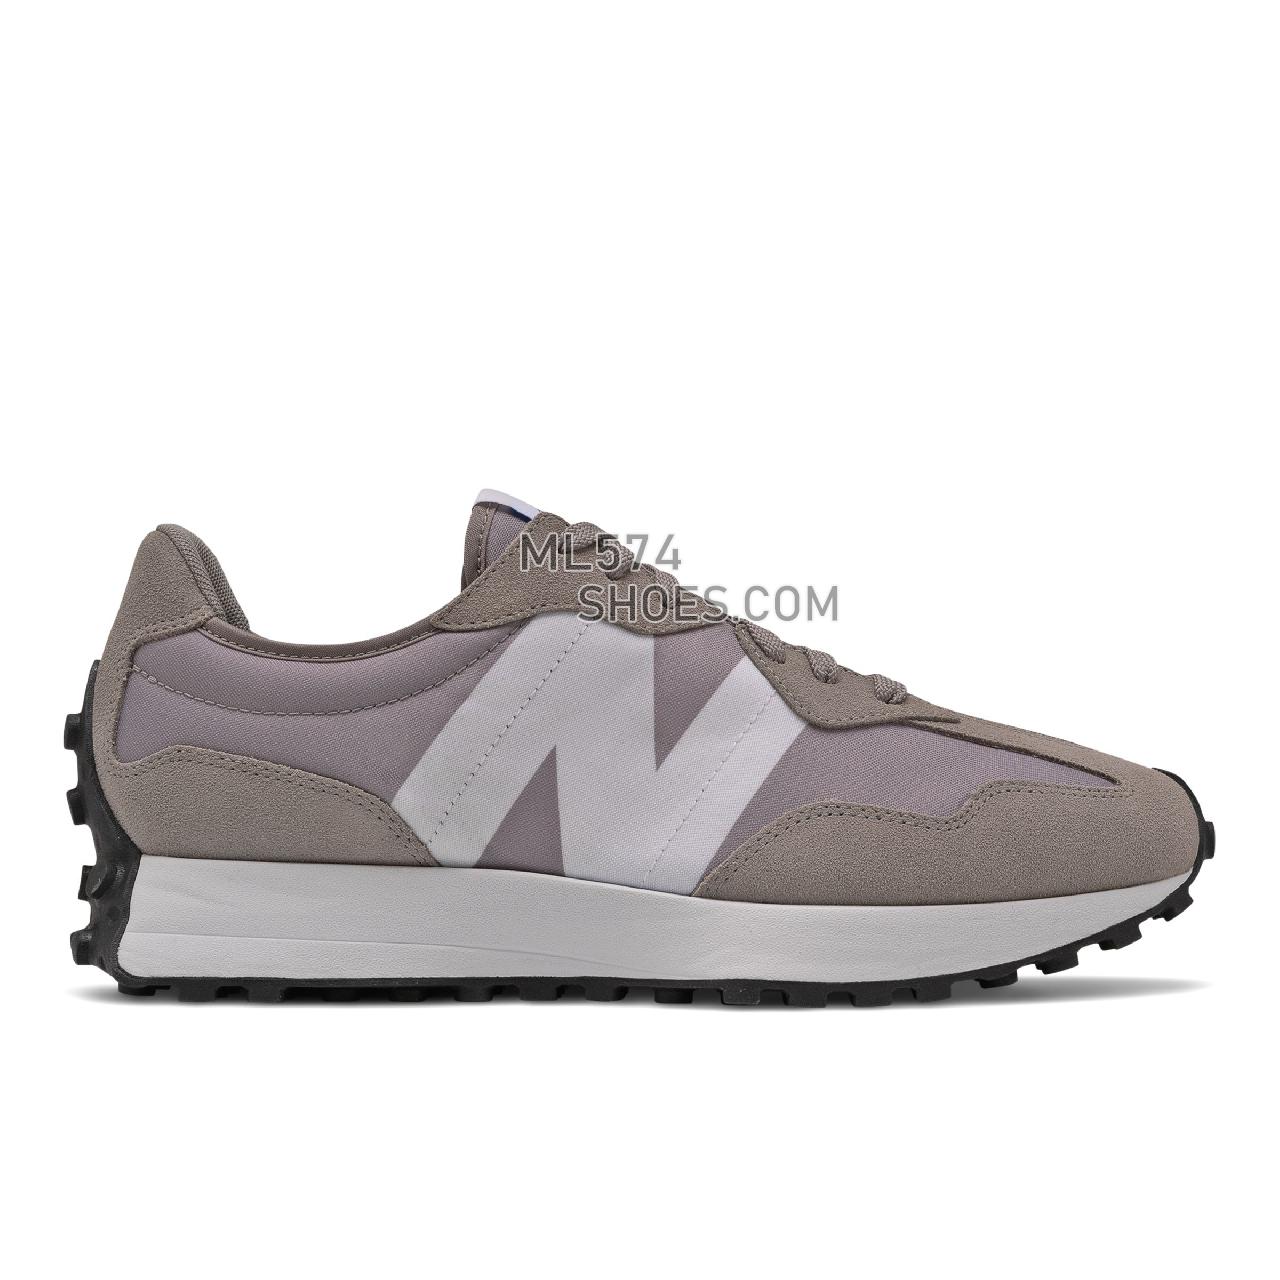 New Balance 327 - Men's Classic Sneakers - Marblehead with White - MS327CPI